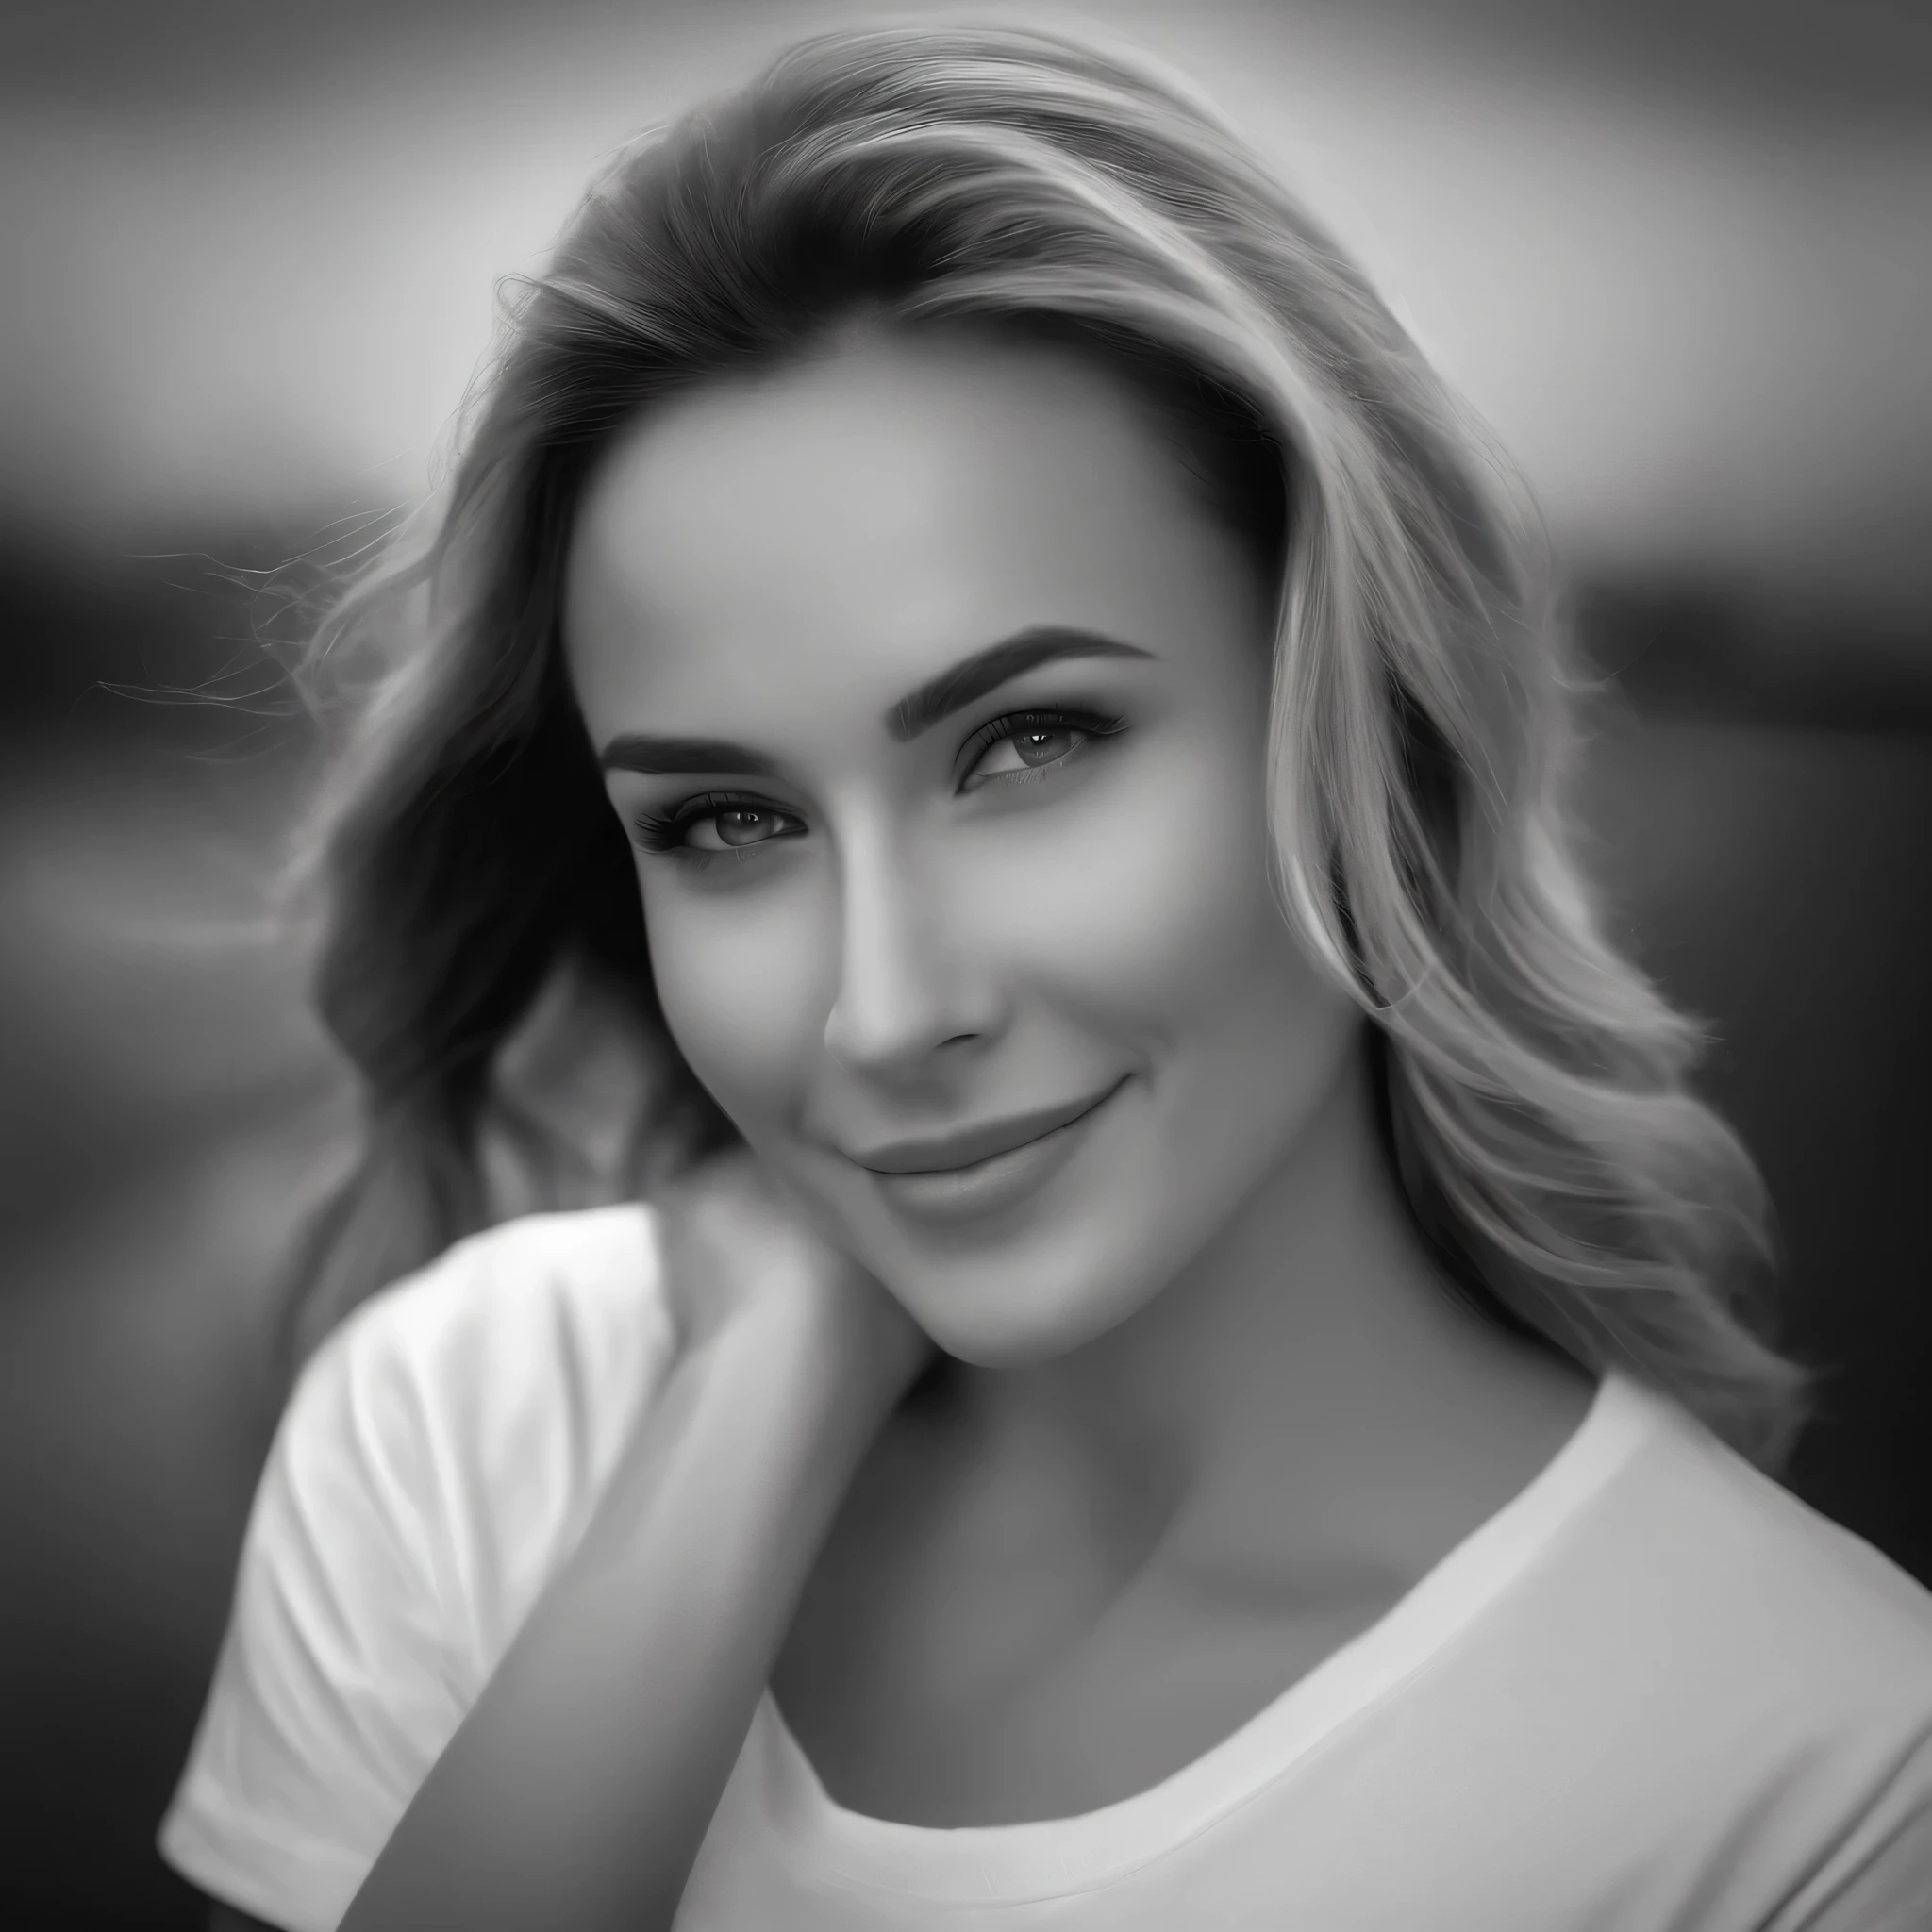 (photo: 1.3) af (realism: 1.4), (((white T-shirt))), (blond lady), super high resolution, (realism: 1.4), 1 girl, female avatar, soft light, Black hair, smile, facial focus, cheerful, young, confident, ((gray background)), (((monochrome background))), high definition, details, slightly looking up, perfect picture, movie quality, ultra high definition, Female avatar, beautiful girl, young and beautiful, exquisite face, elegant and luxurious